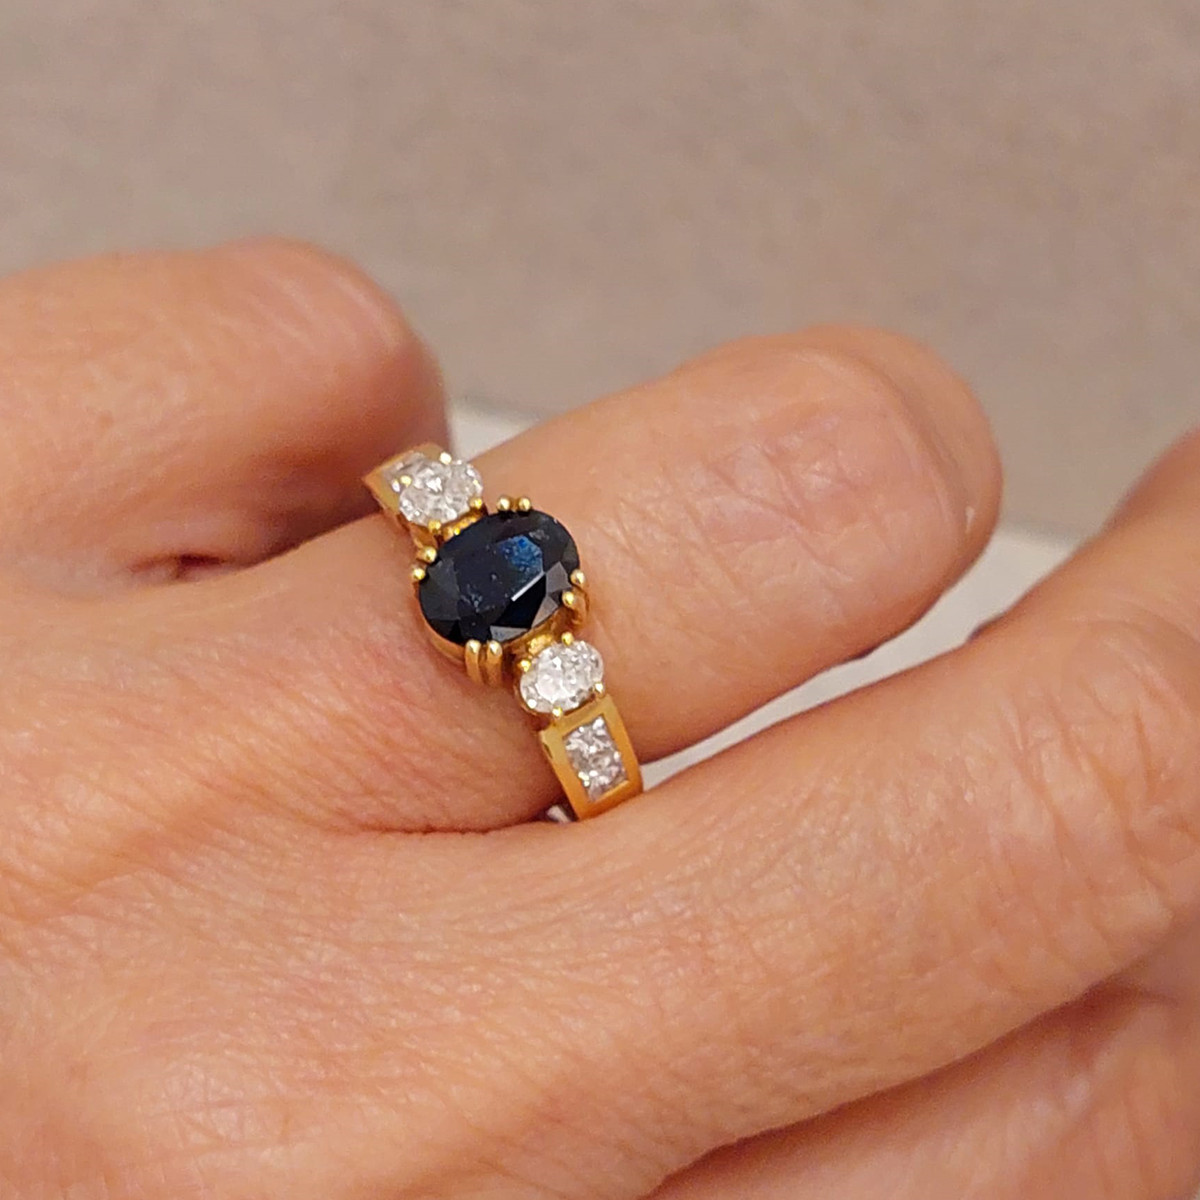 OVAL SAPPHIRE GOLD RING AND DIAMONDS